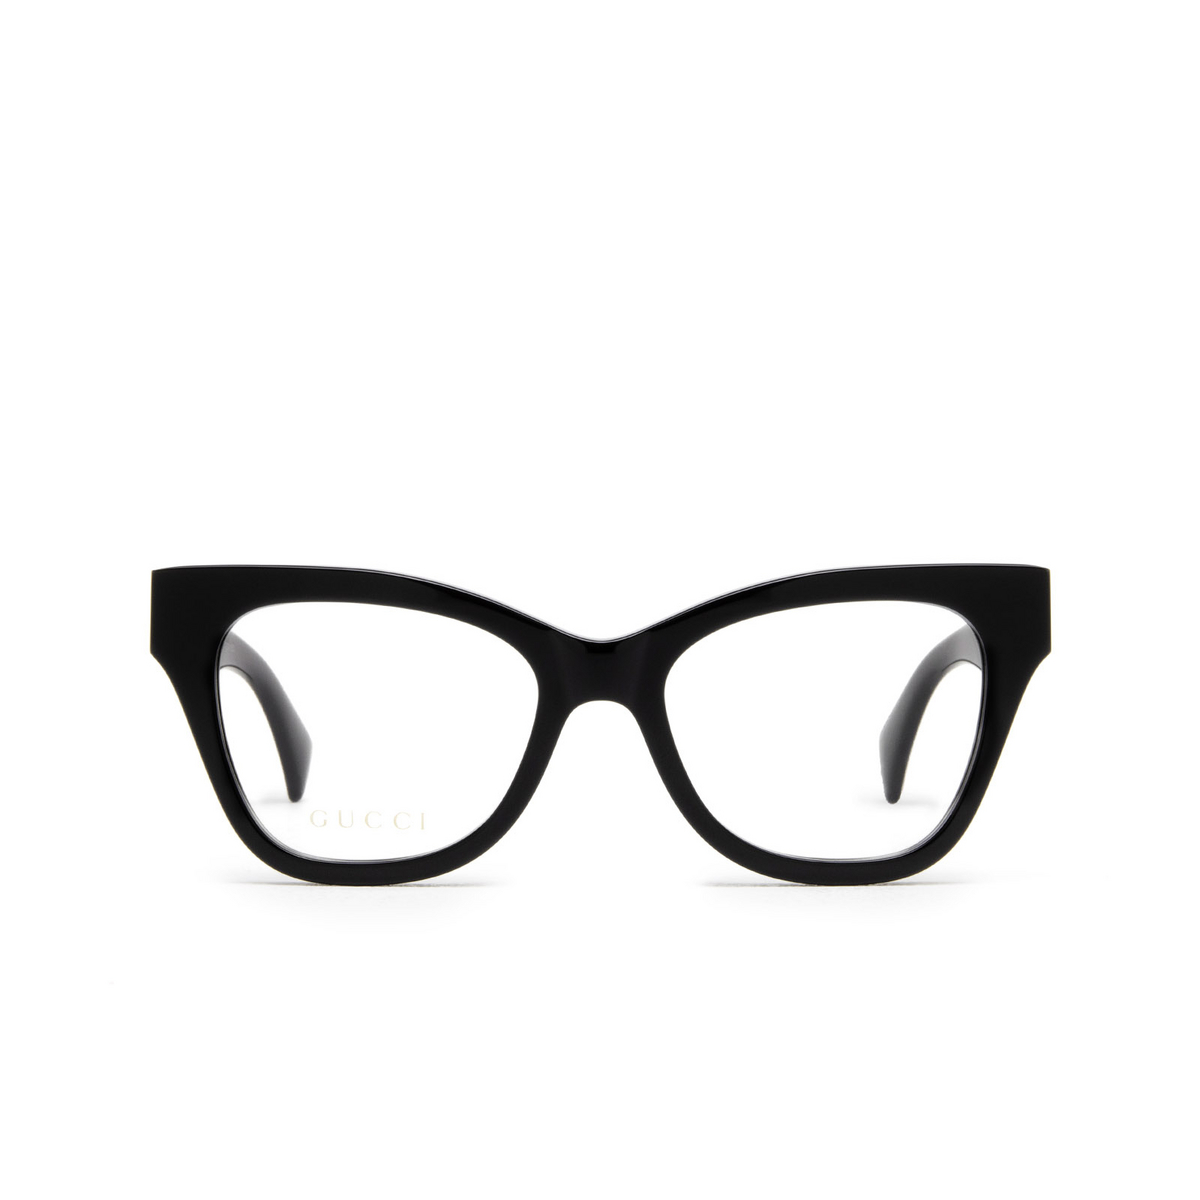 Gucci® Cat-eye Eyeglasses: GG1133O color 001 Black - front view